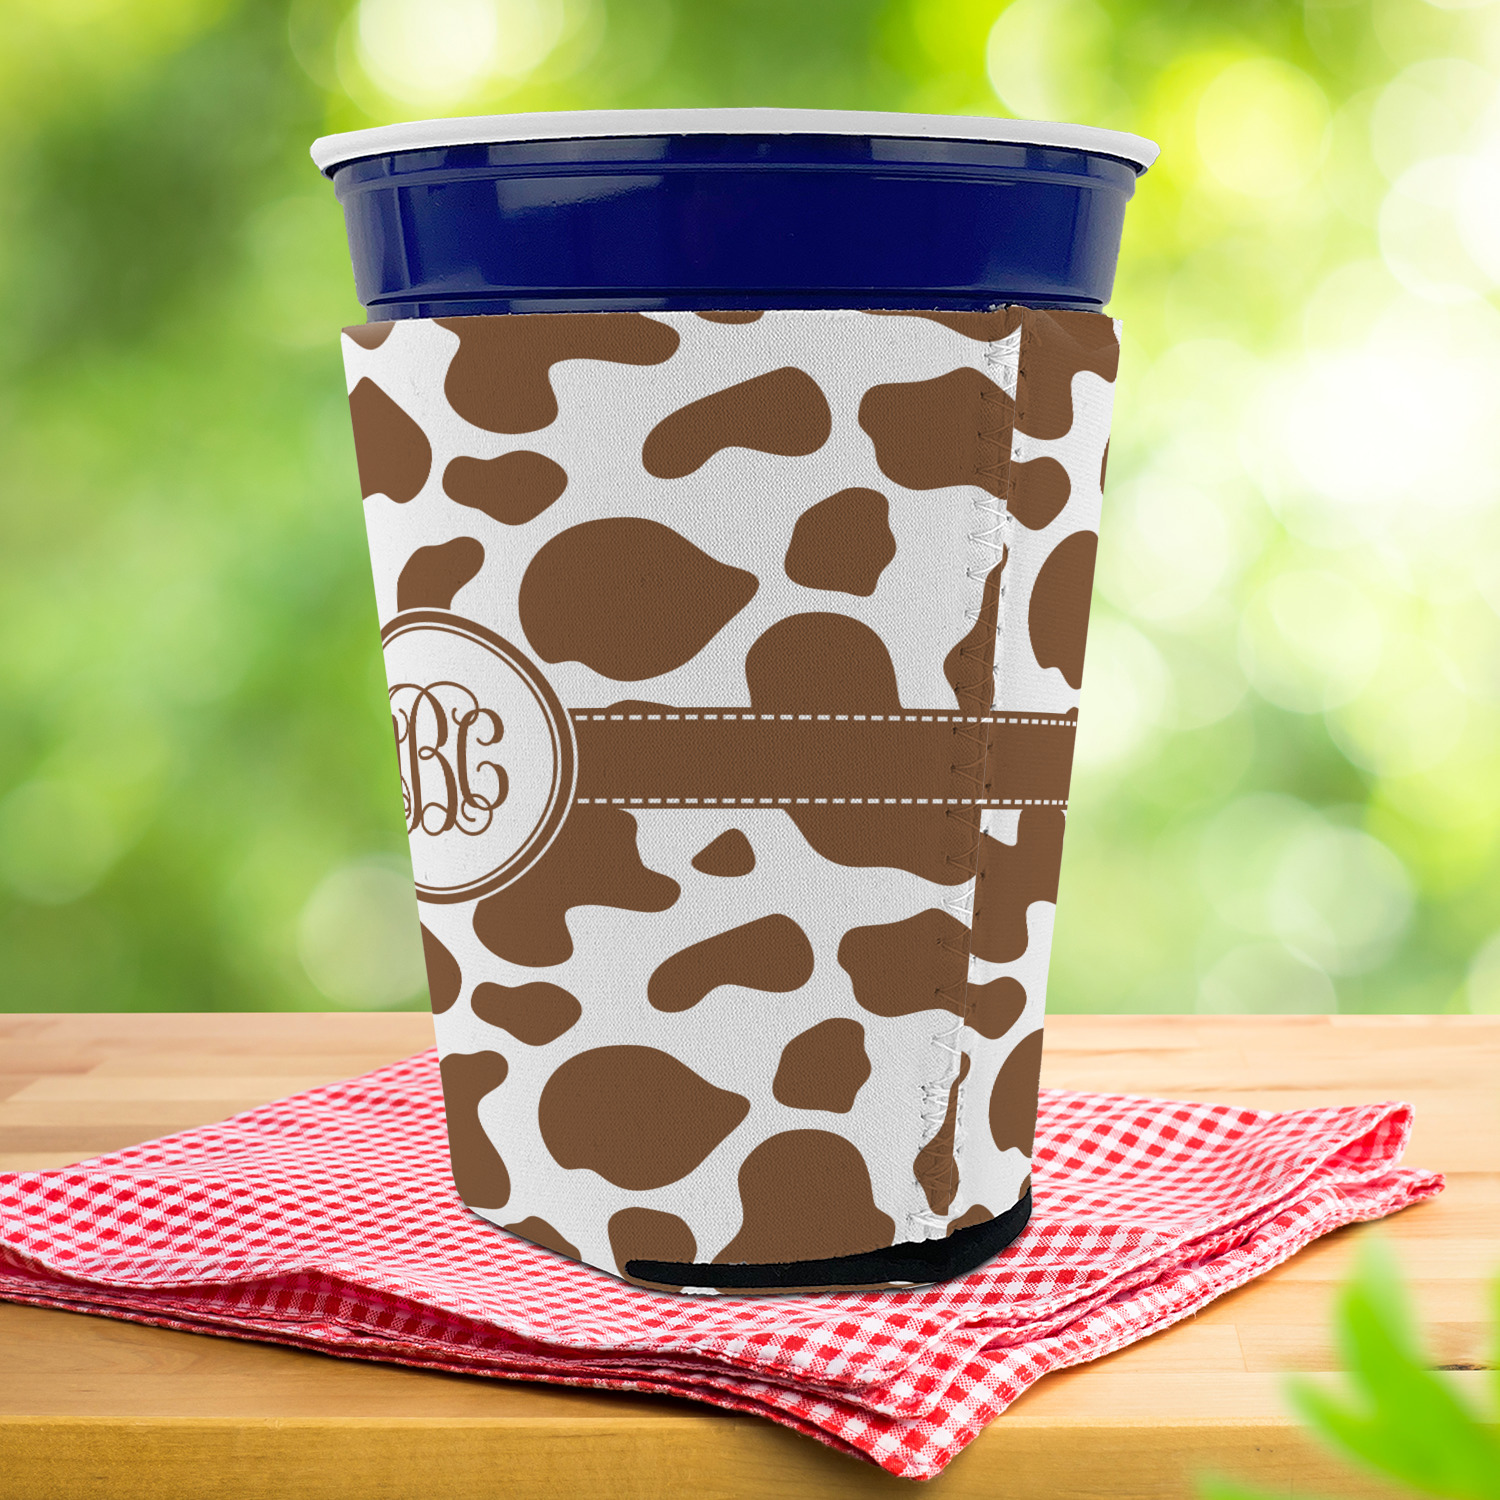 https://www.youcustomizeit.com/common/MAKE/74569/Cow-Print-Party-Cup-Sleeves-with-bottom-LIFESTYLE.jpg?lm=1671319752